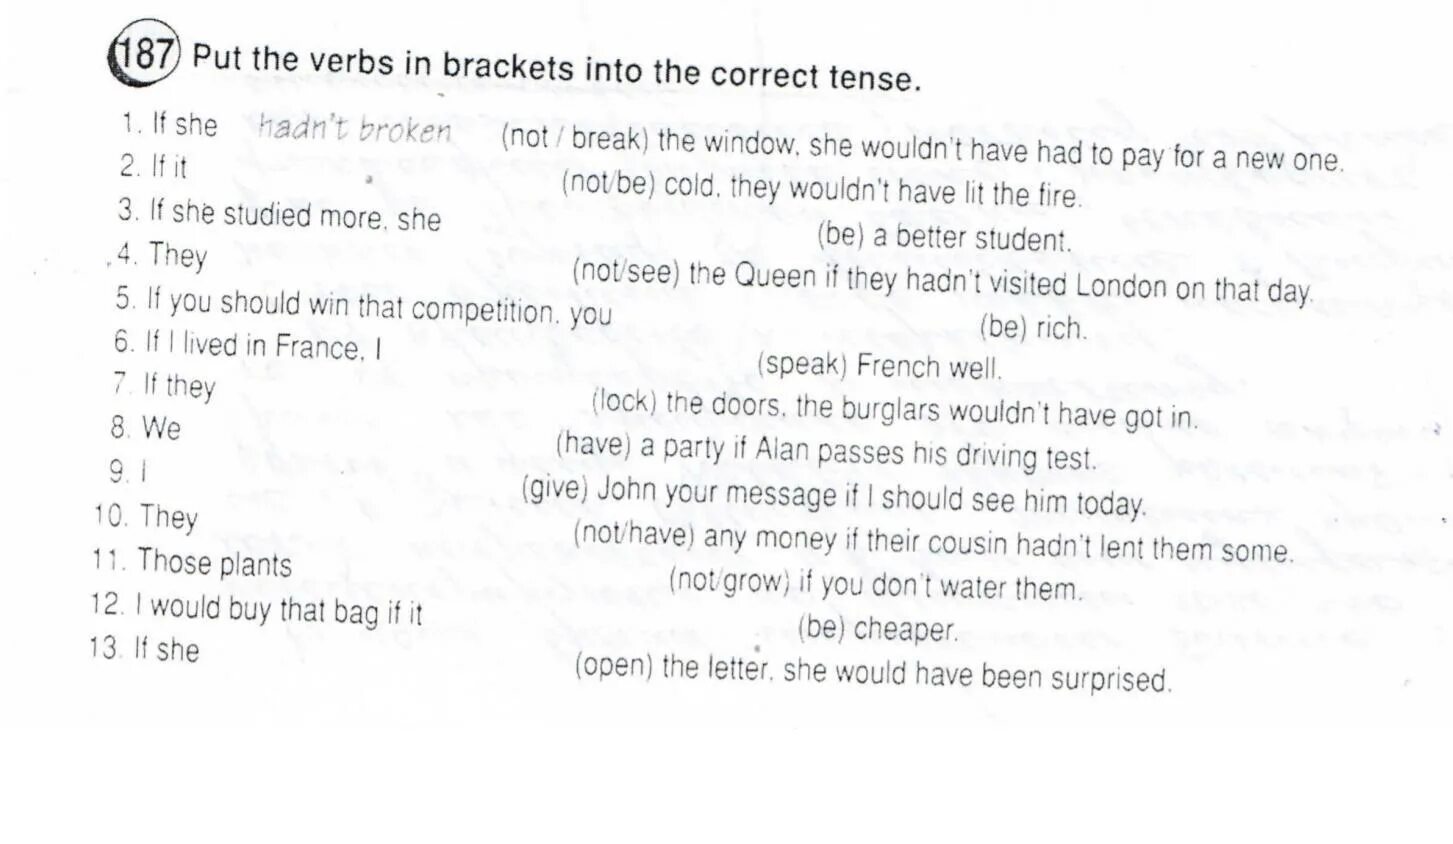 She won t pass the exam. Put the verbs in Brackets into the correct Tense. Open the Brackets and put the verbs into the correct fense 5 класс. Put the verbs in the correct Tense form. Put the verbs in Brackets into the.